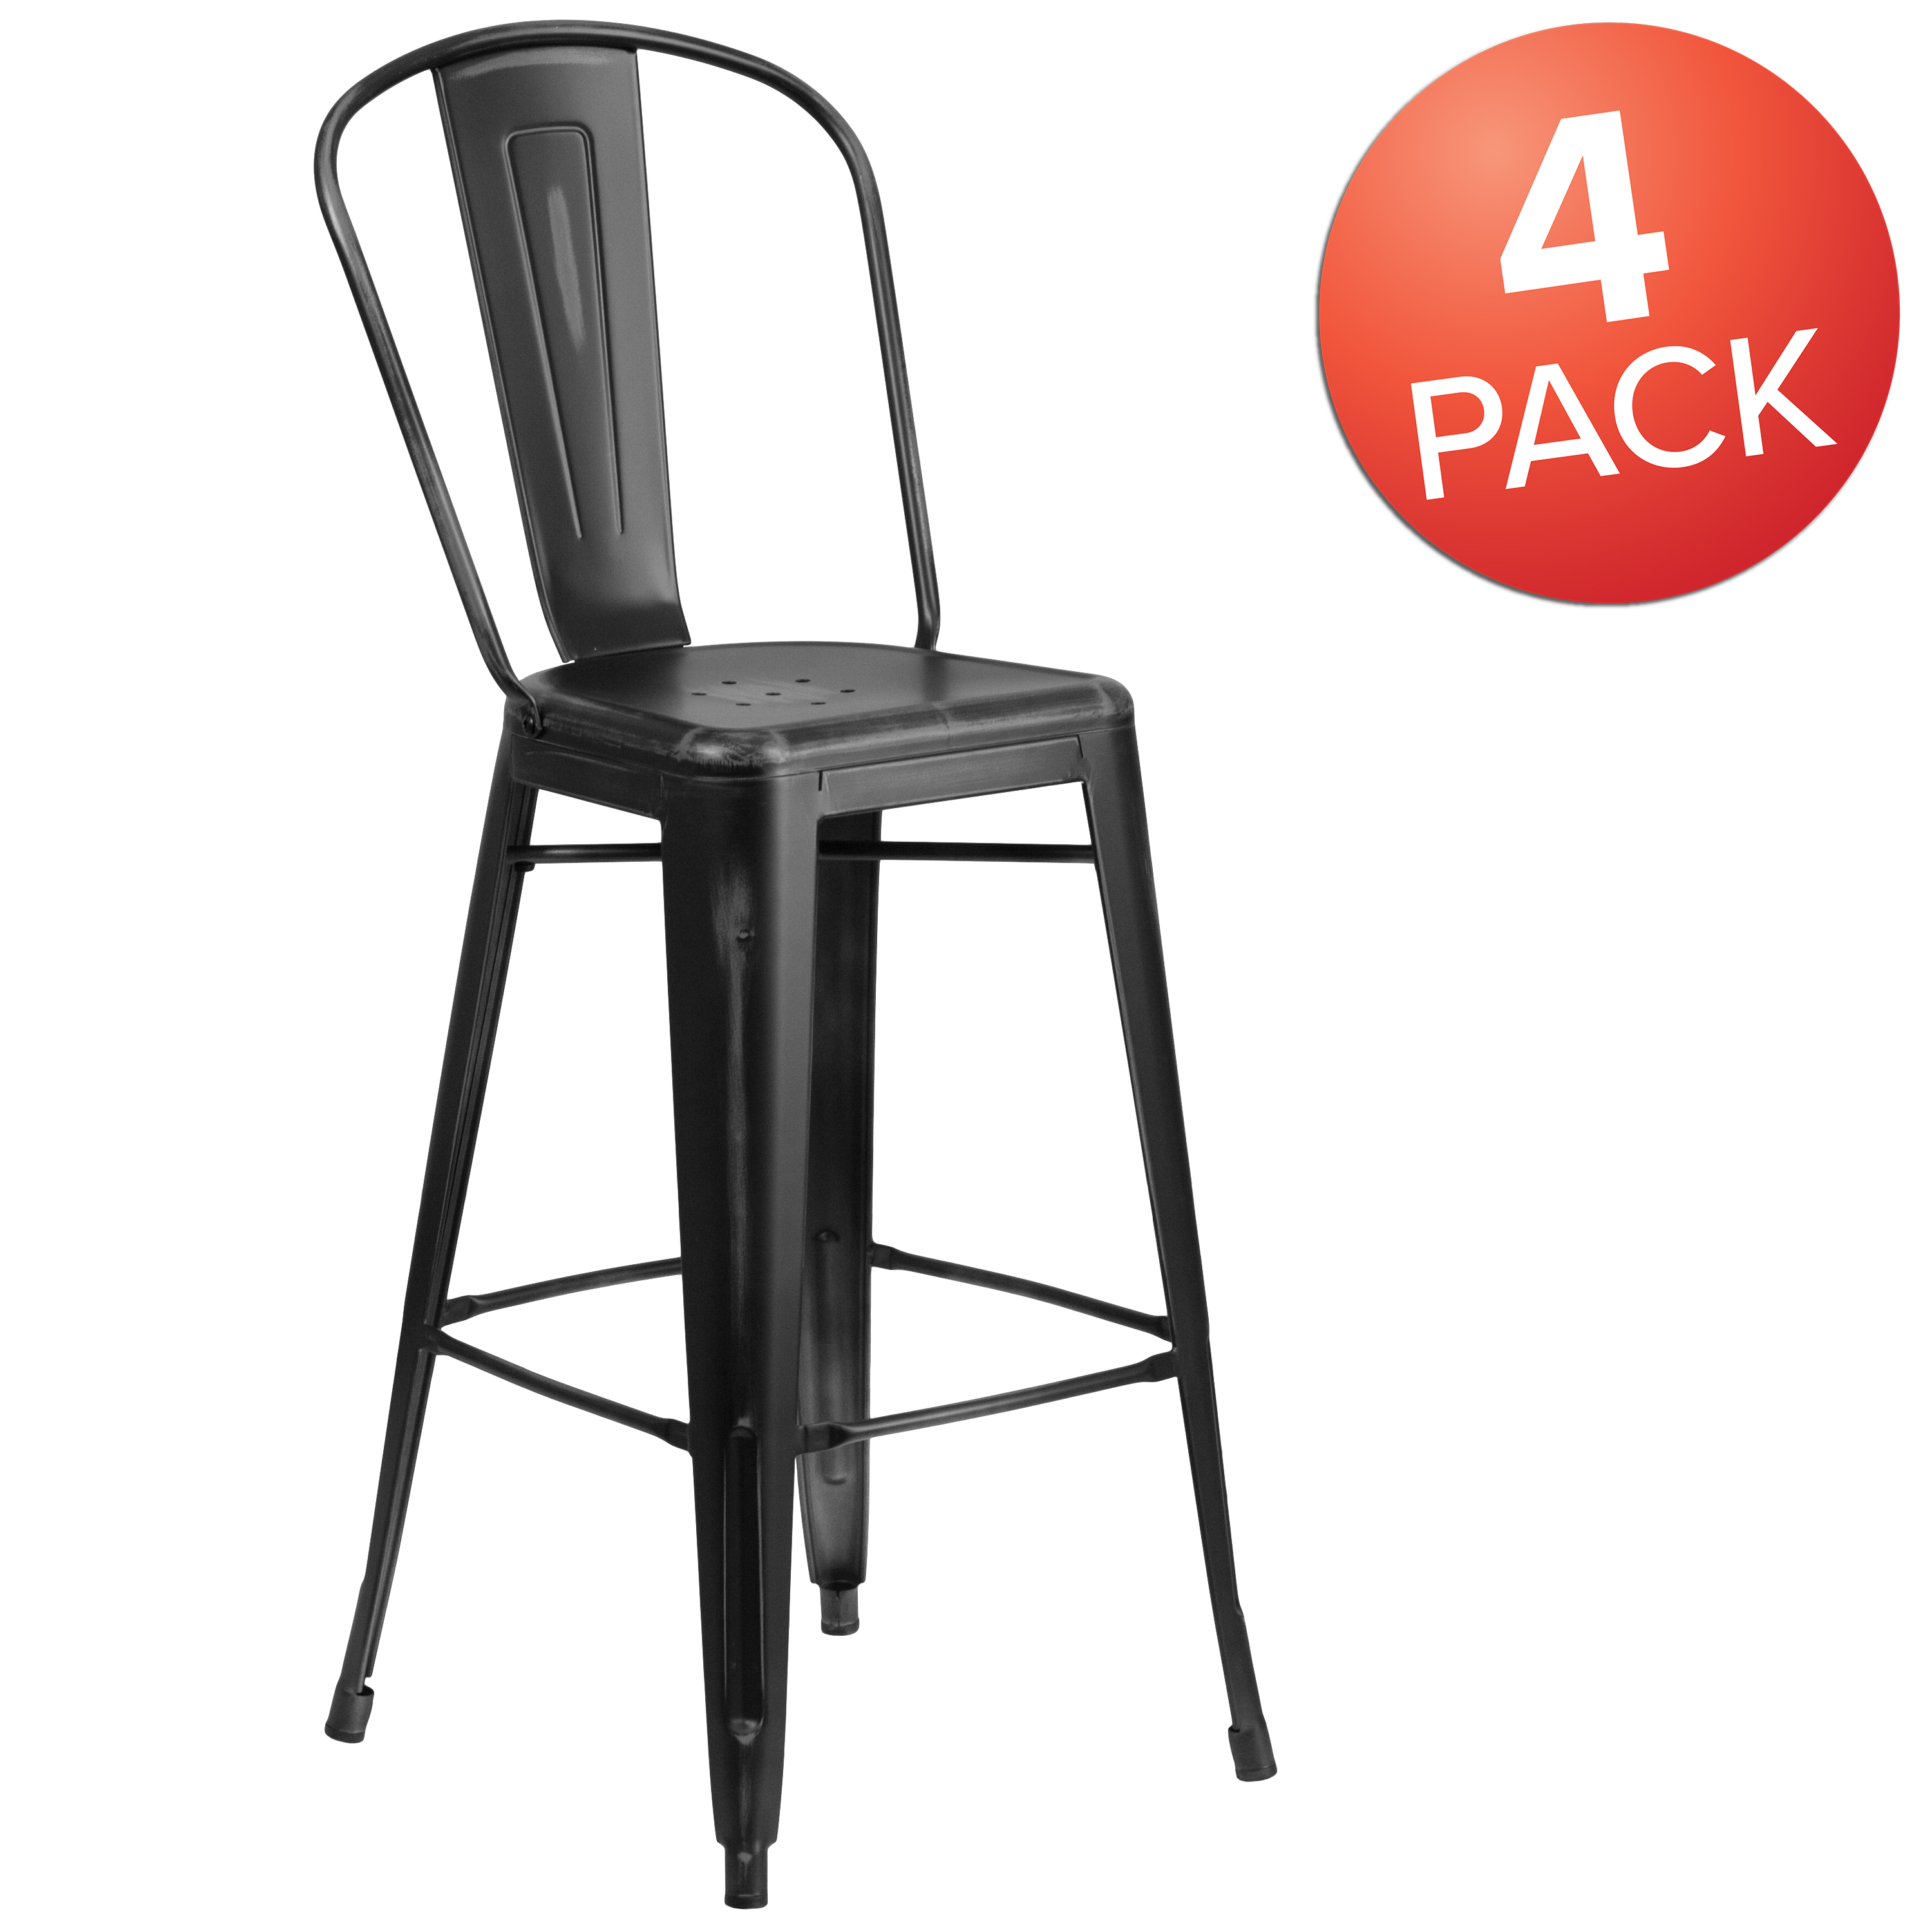 Flash Furniture Blake Commercial Grade 4 Pack 30" High Distressed Black Metal Indoor-Outdoor Barstool with Back - image 3 of 13